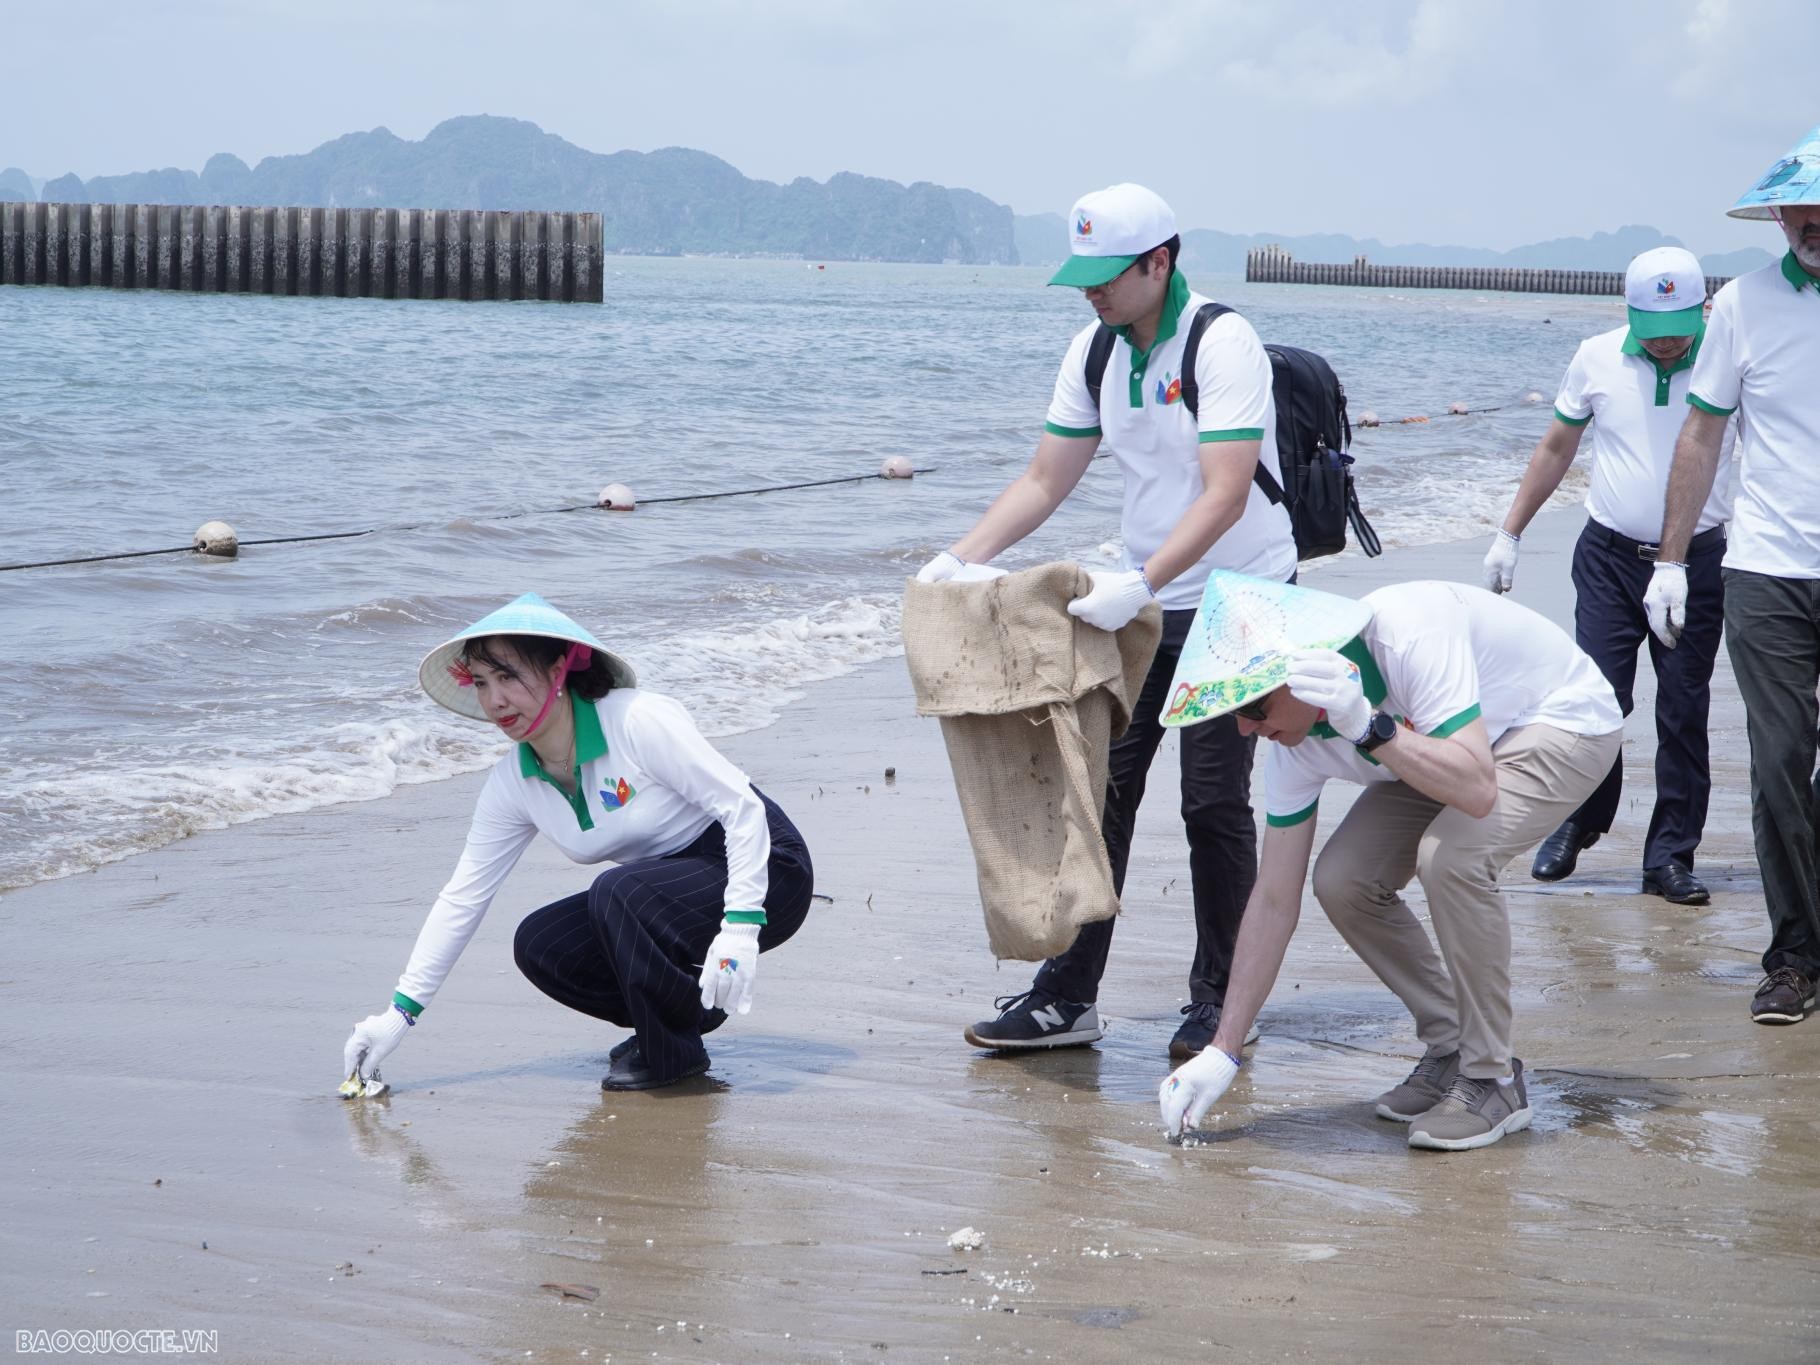 European Day in Vietnam: Joining hands for a clean environment